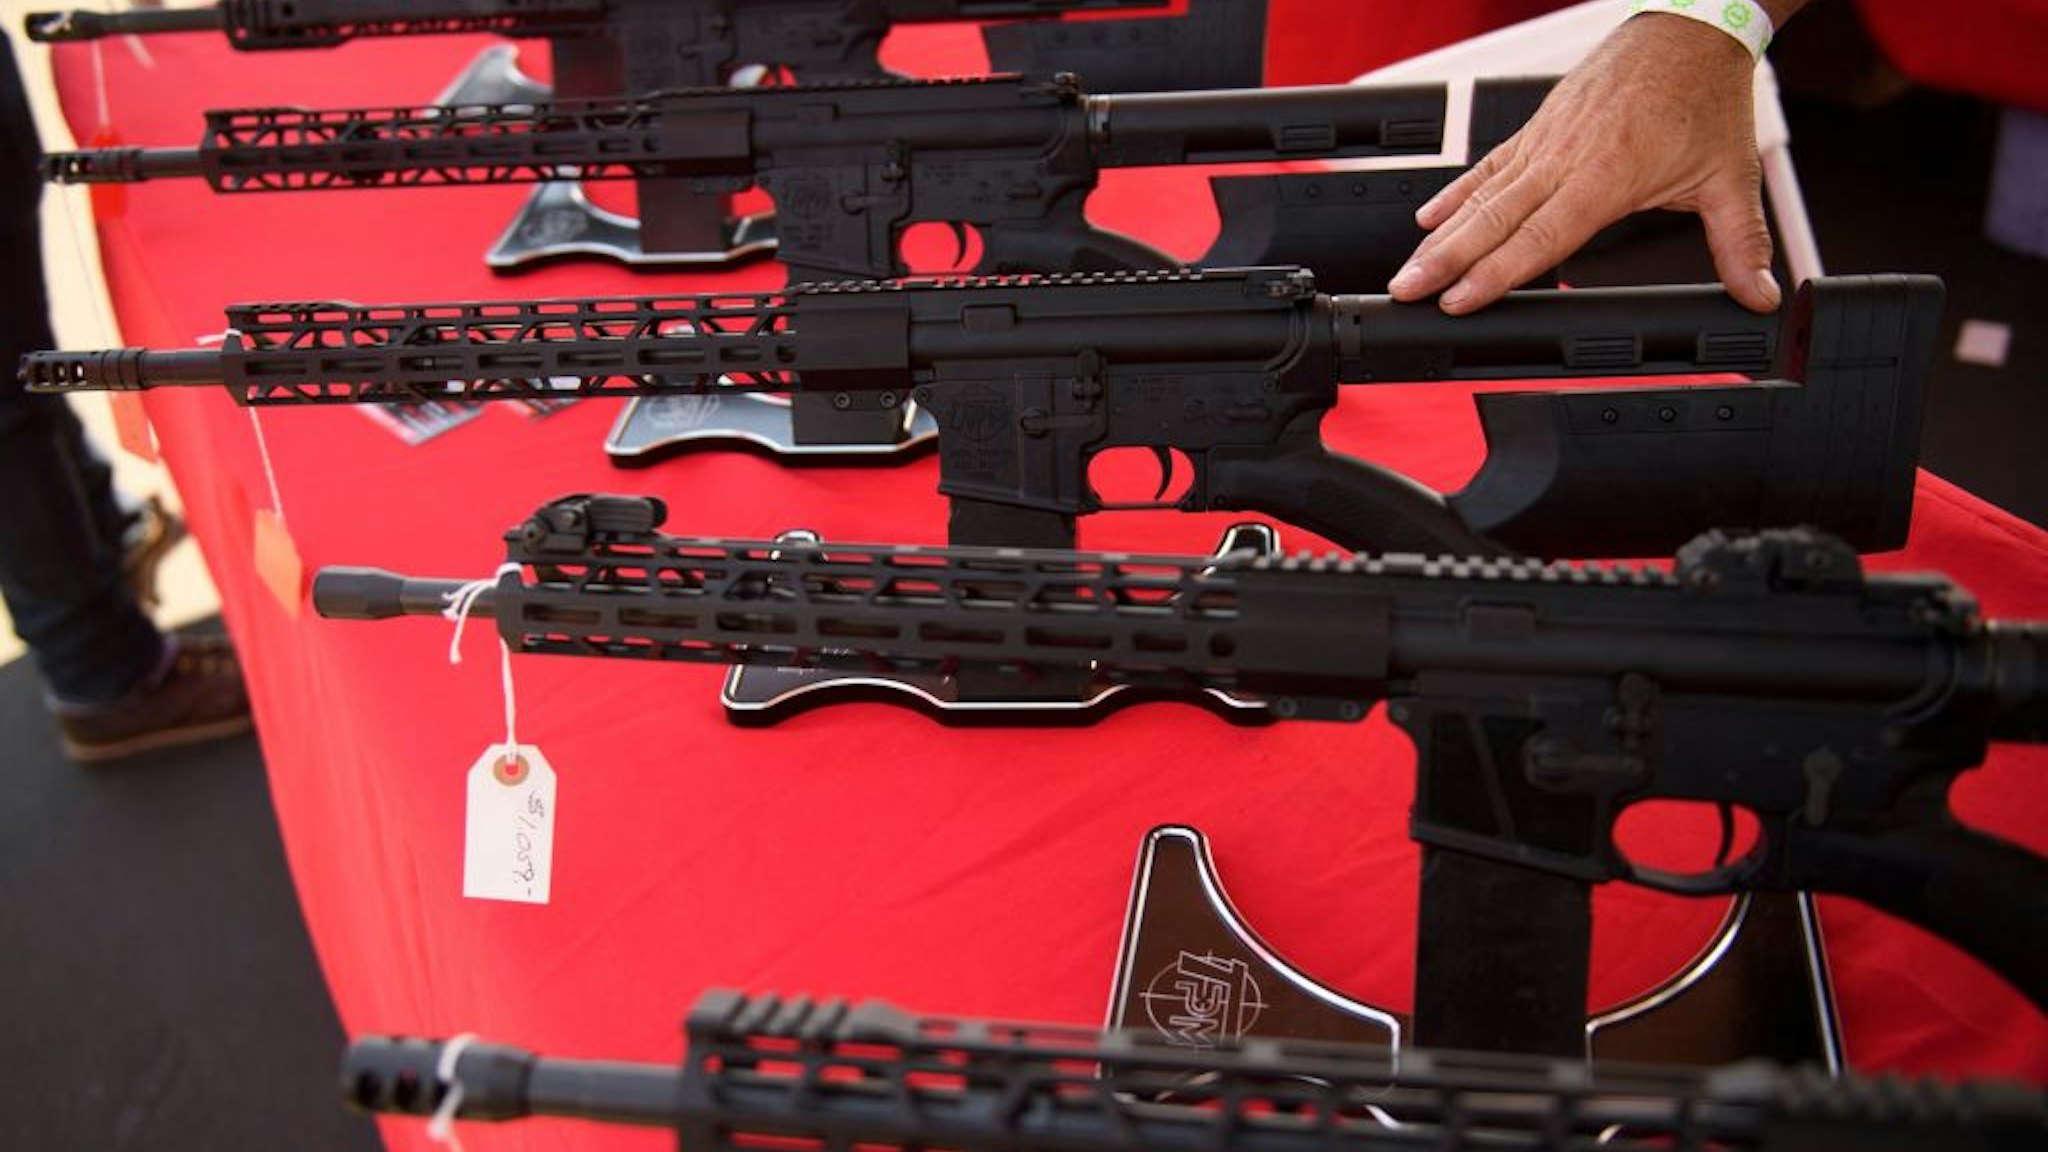 A TPM Arms LLC California-legal featureless AR-15 style rifle is displayed for sale at the company's booth at the Crossroads of the West Gun Show at the Orange County Fairgrounds on June 5, 2021 in Costa Mesa, California. - Gun sales increased in the US following Covid-19 pandemic lockdowns. On June 4, a San Diego federal court judge overturned California's three-decade old ban on assault weapons, defined as a semiautomatic rifle or pistol with a detachable magazine and certain features, but granted a 30-day stay for a State appeal and likely future court decisions on the constitutionality of the ban under the Second Amendment. An industry of California legal "featureless" or "compliant" AR-15 style rifles developed for California consumers, adapting to the law with design changes to the popular rifle. (Photo by Patrick T. FALLON / AFP)